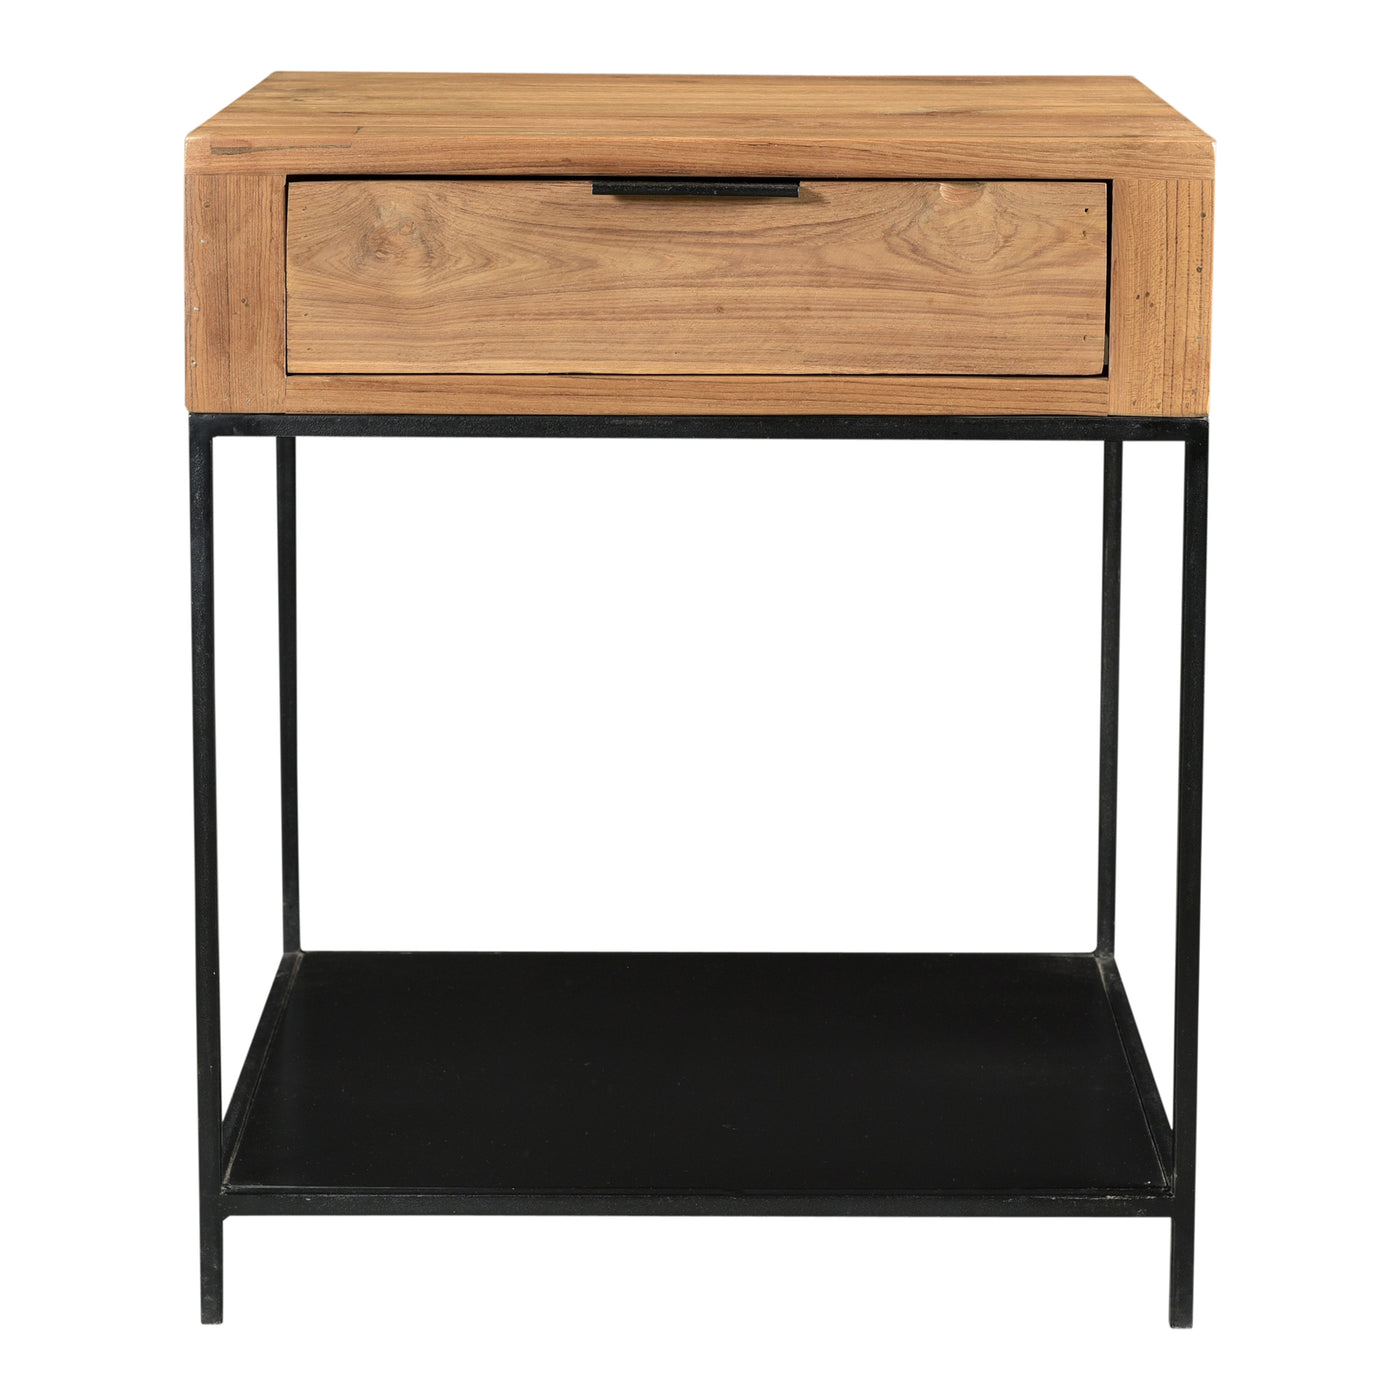 Made from solid teak wood, the Joliet Side Table brings a contemporary edge to your space. A single spacious drawer for a ...